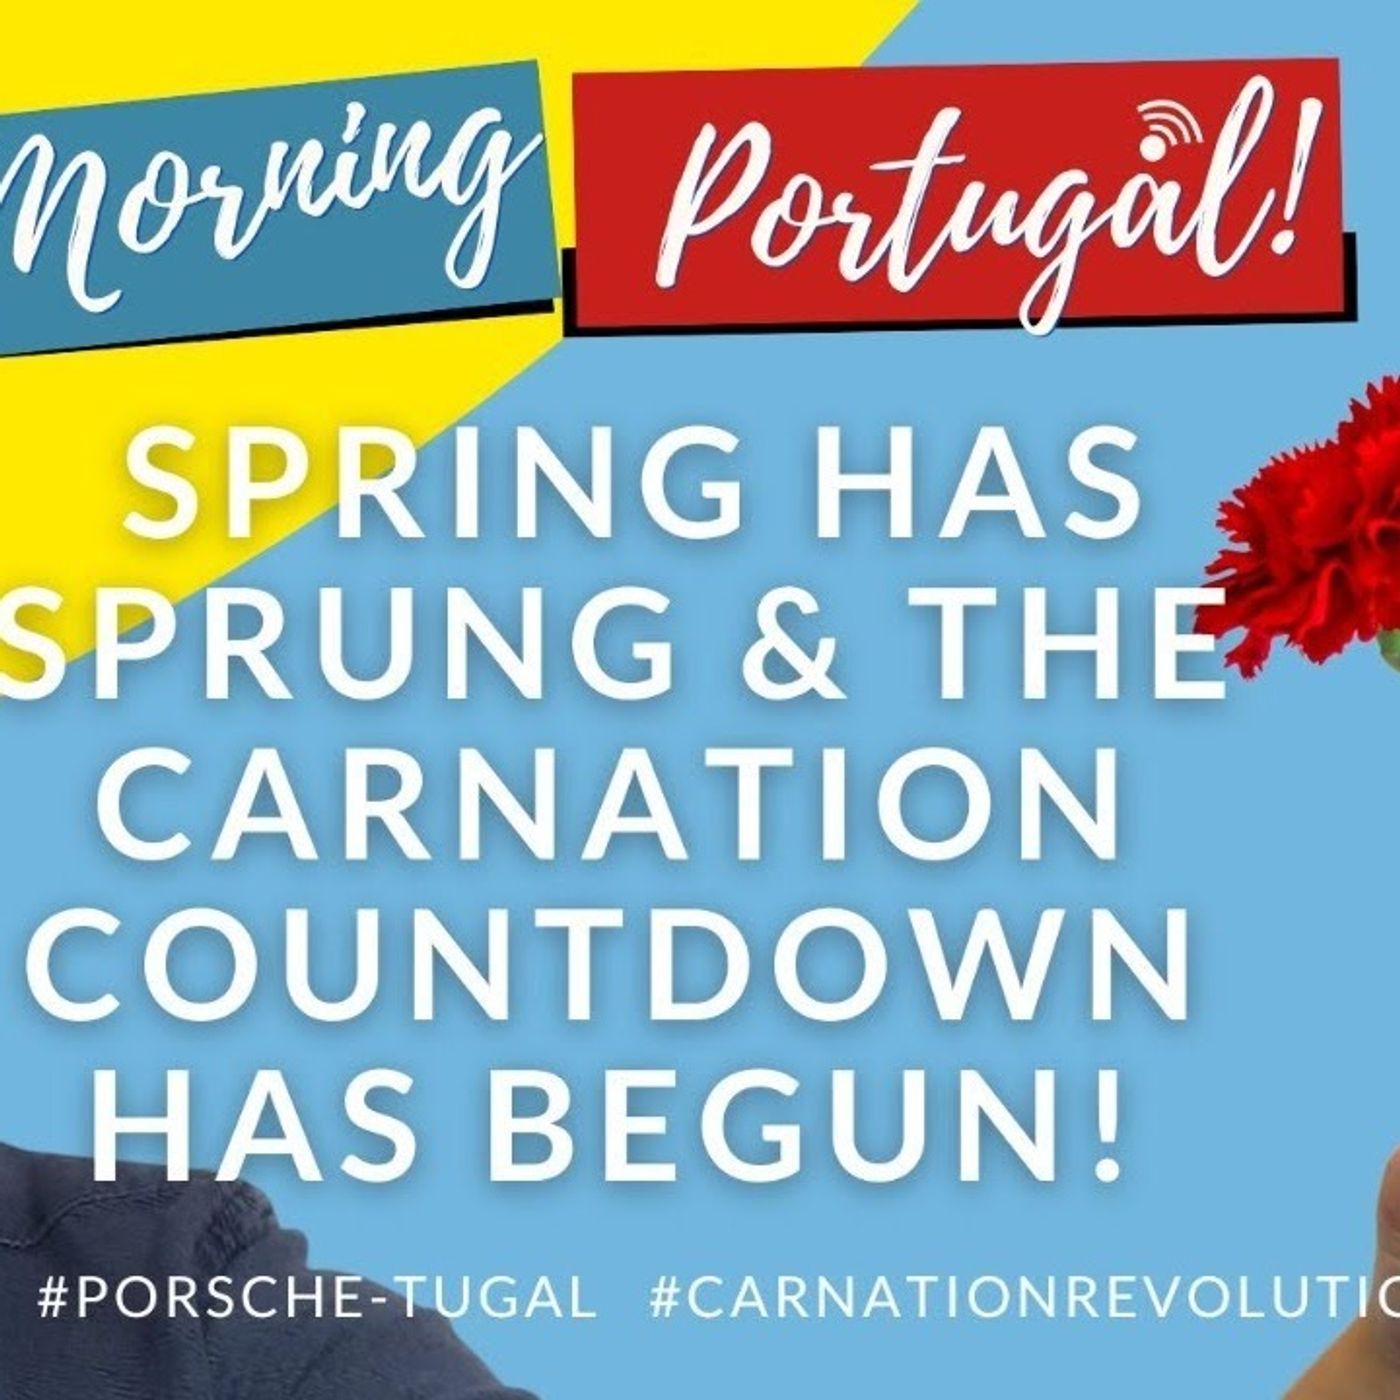 Spring as Sprung & The Carnation Countdown Has Begun on Good Morning Portugal!